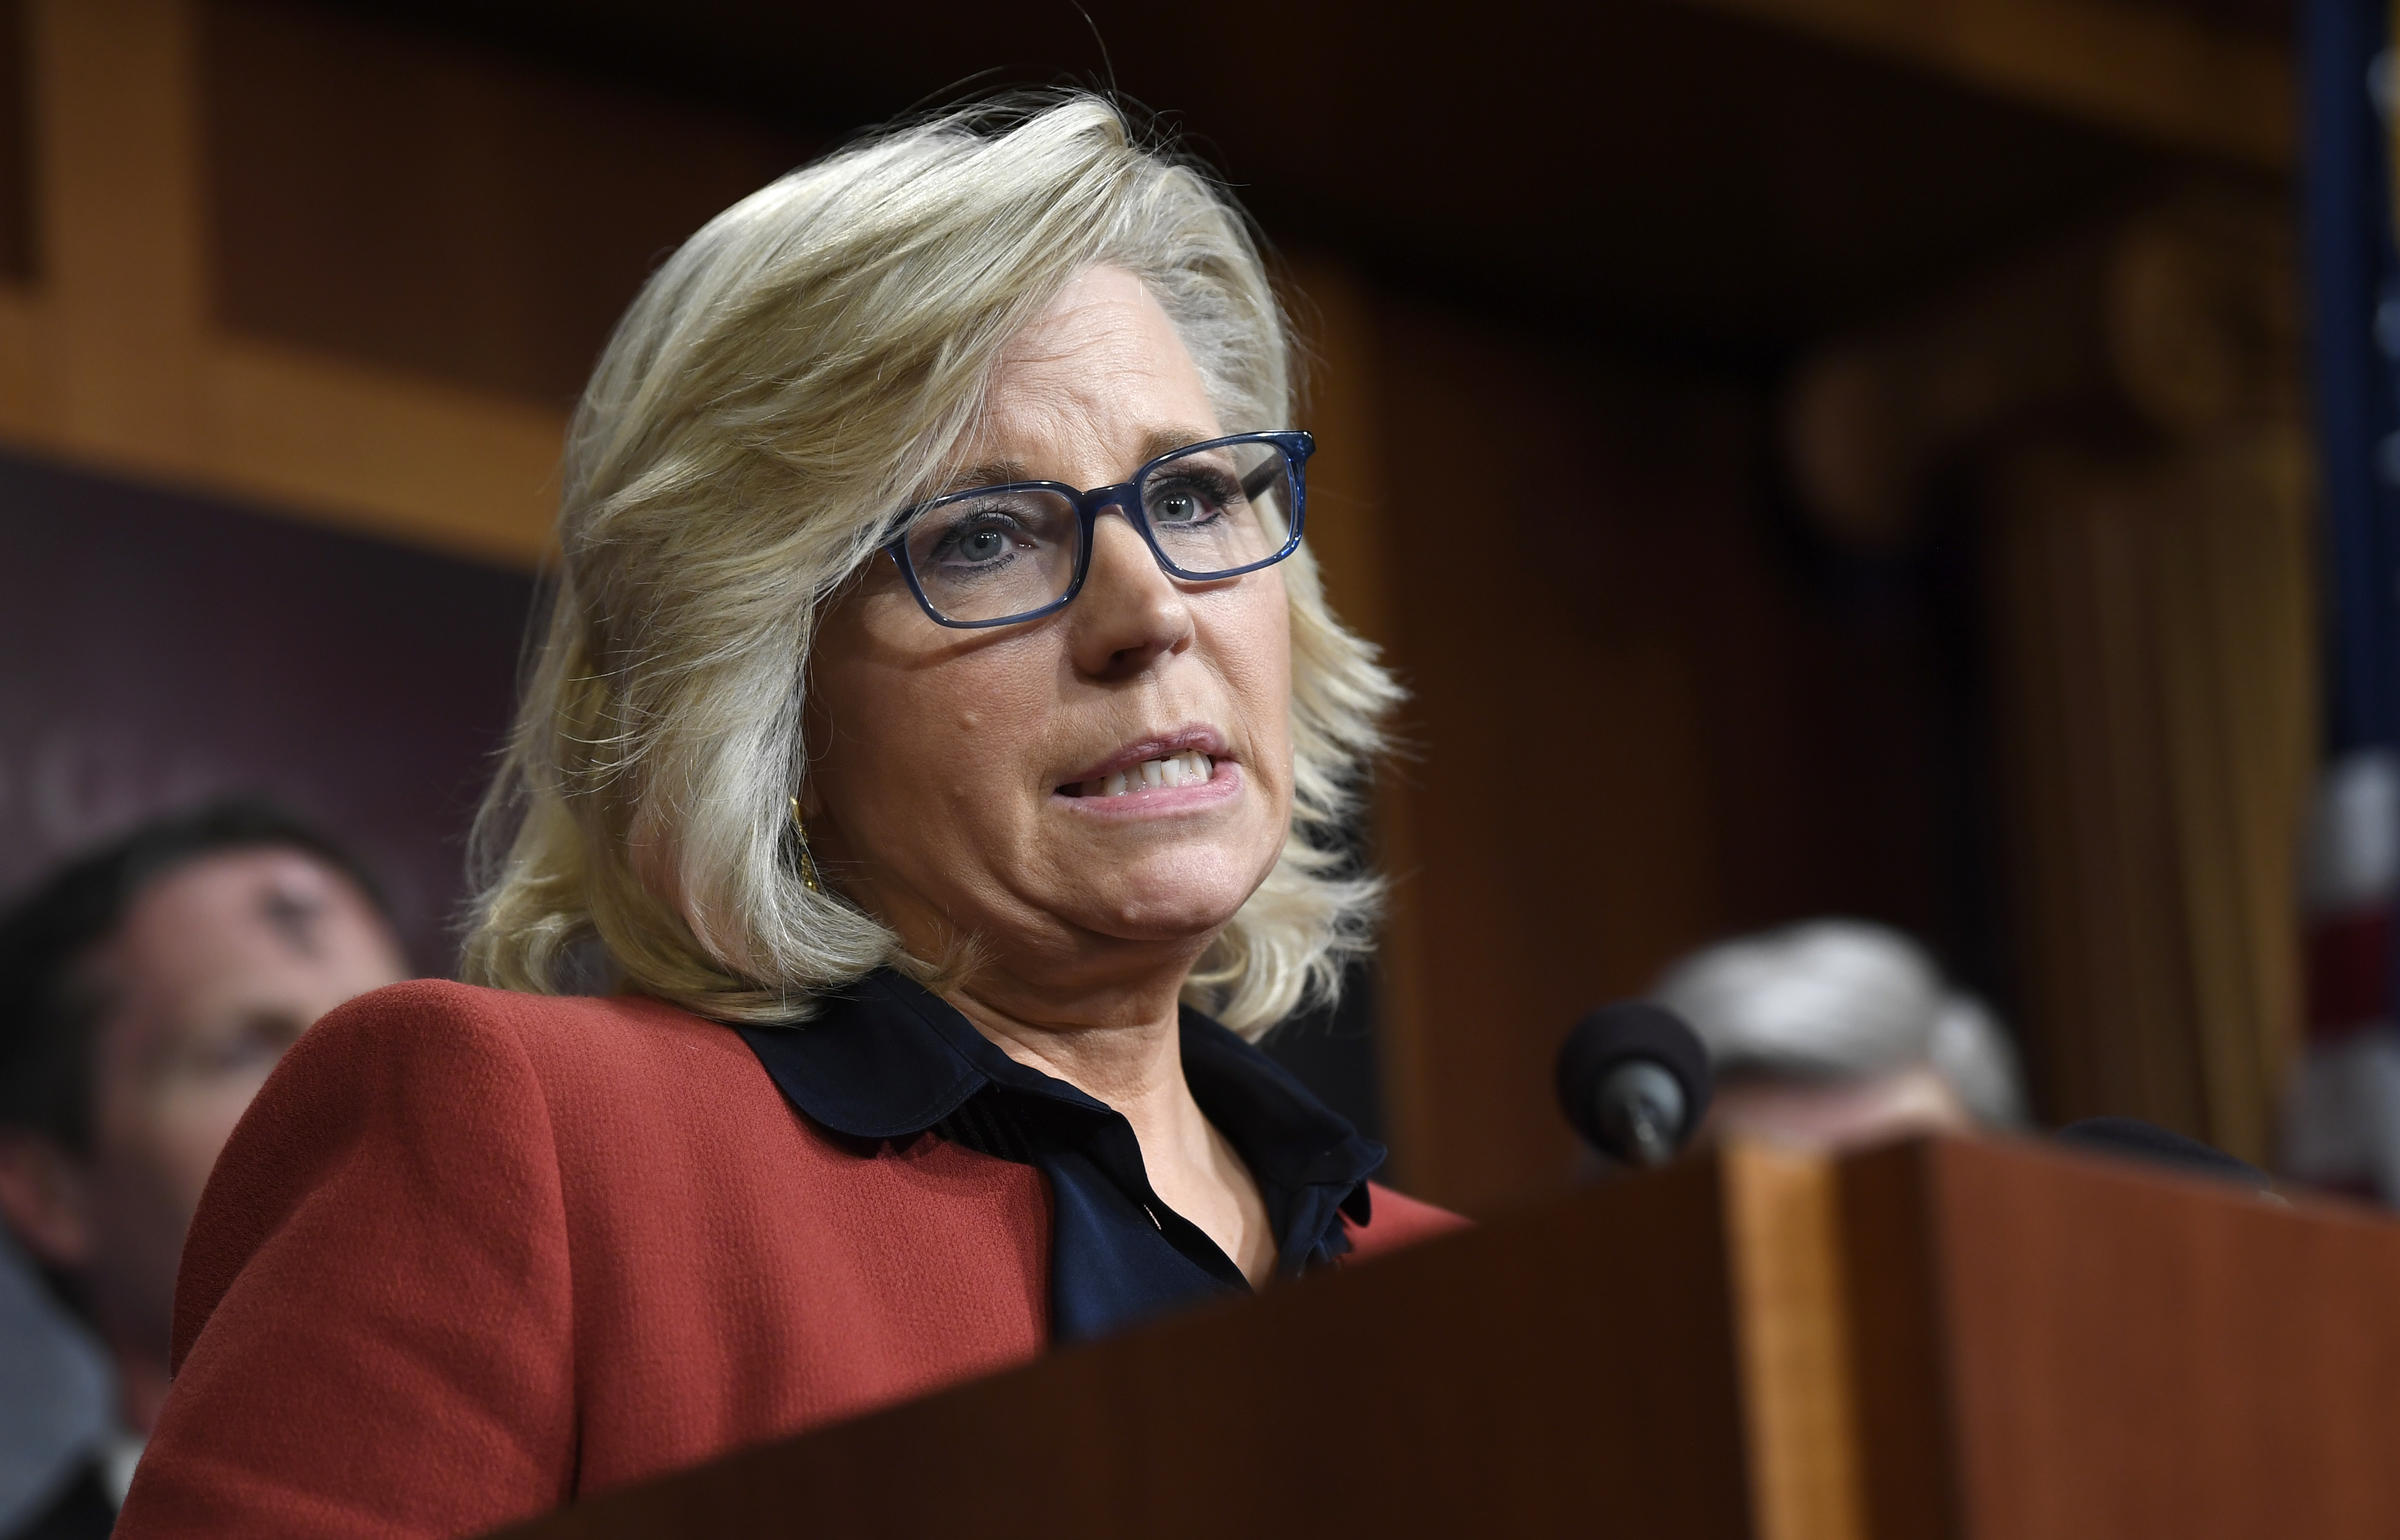 Wyoming Gop Censures Liz Cheney For Voting To Impeach Trump Wjct News 6789